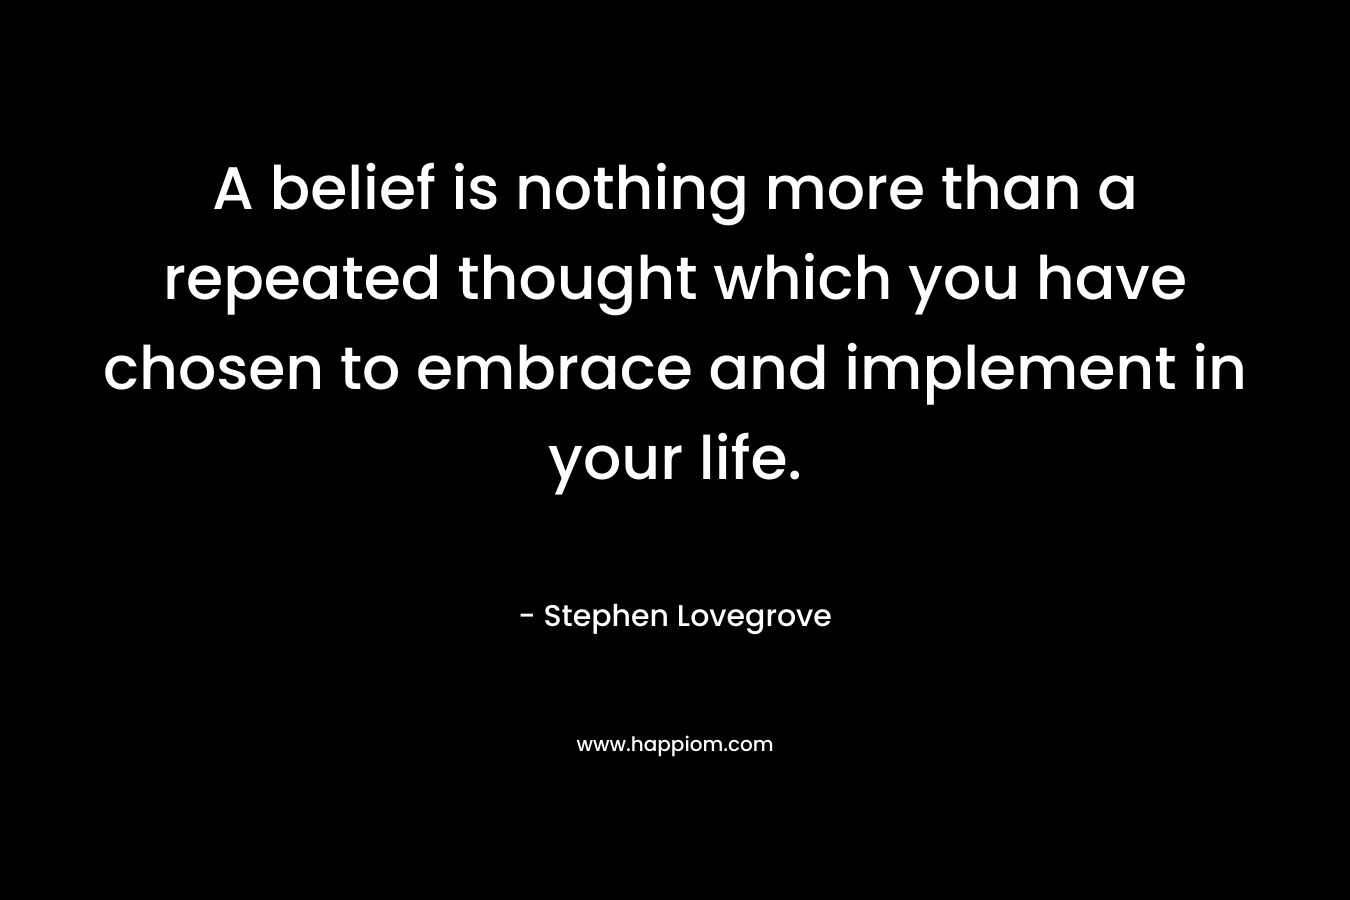 A belief is nothing more than a repeated thought which you have chosen to embrace and implement in your life.